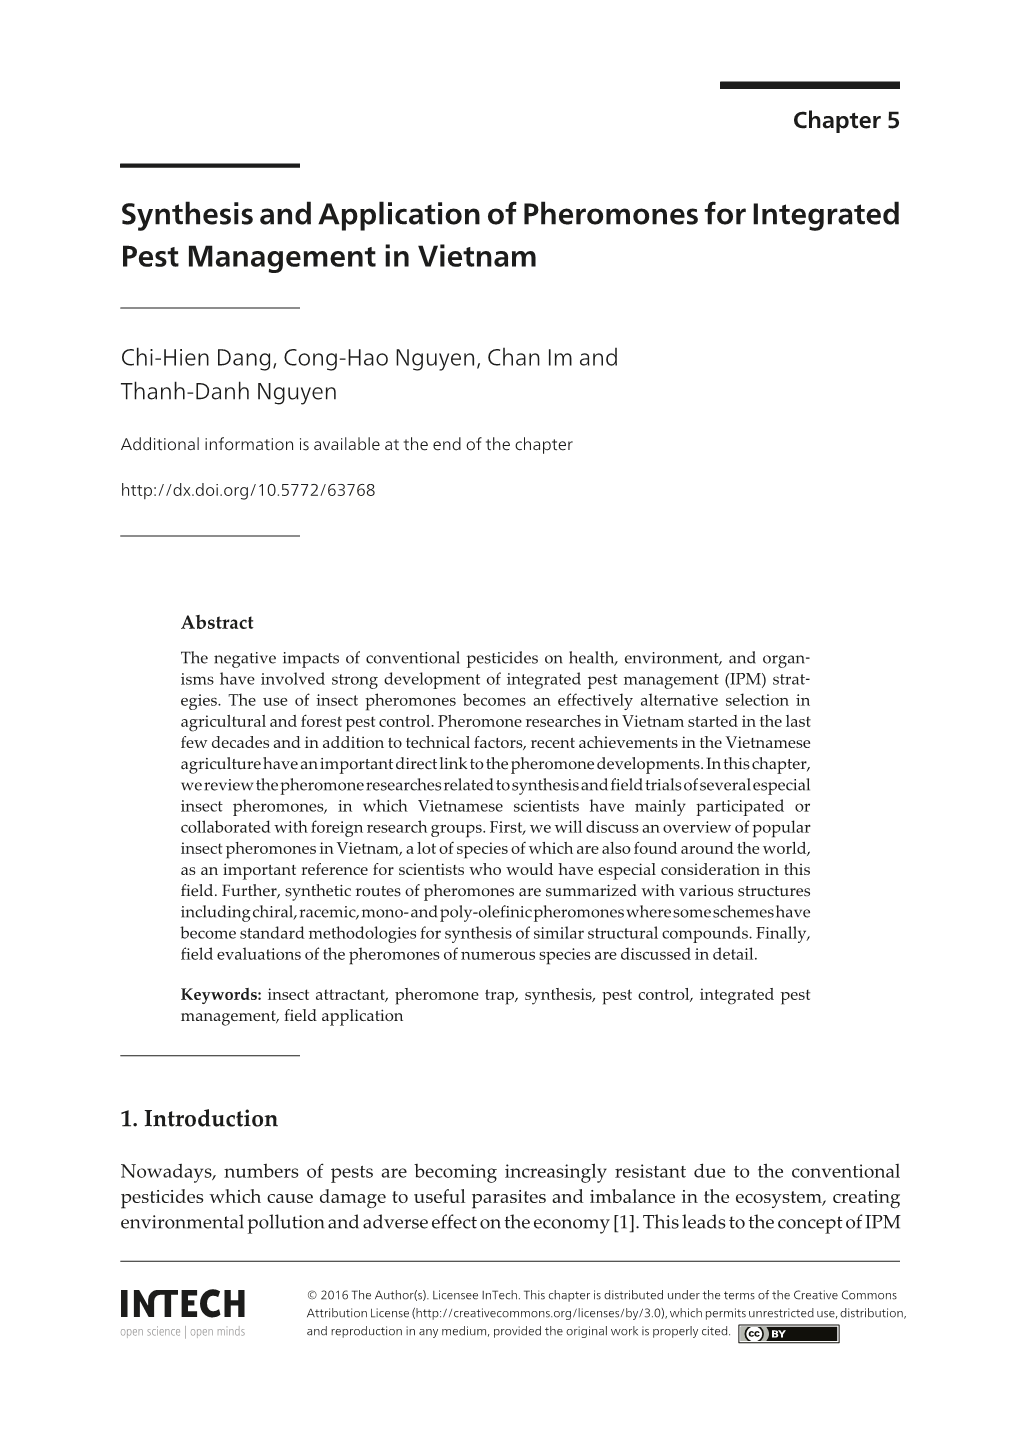 Synthesis and Application of Pheromones for Integrated Pest Management in Vietnam